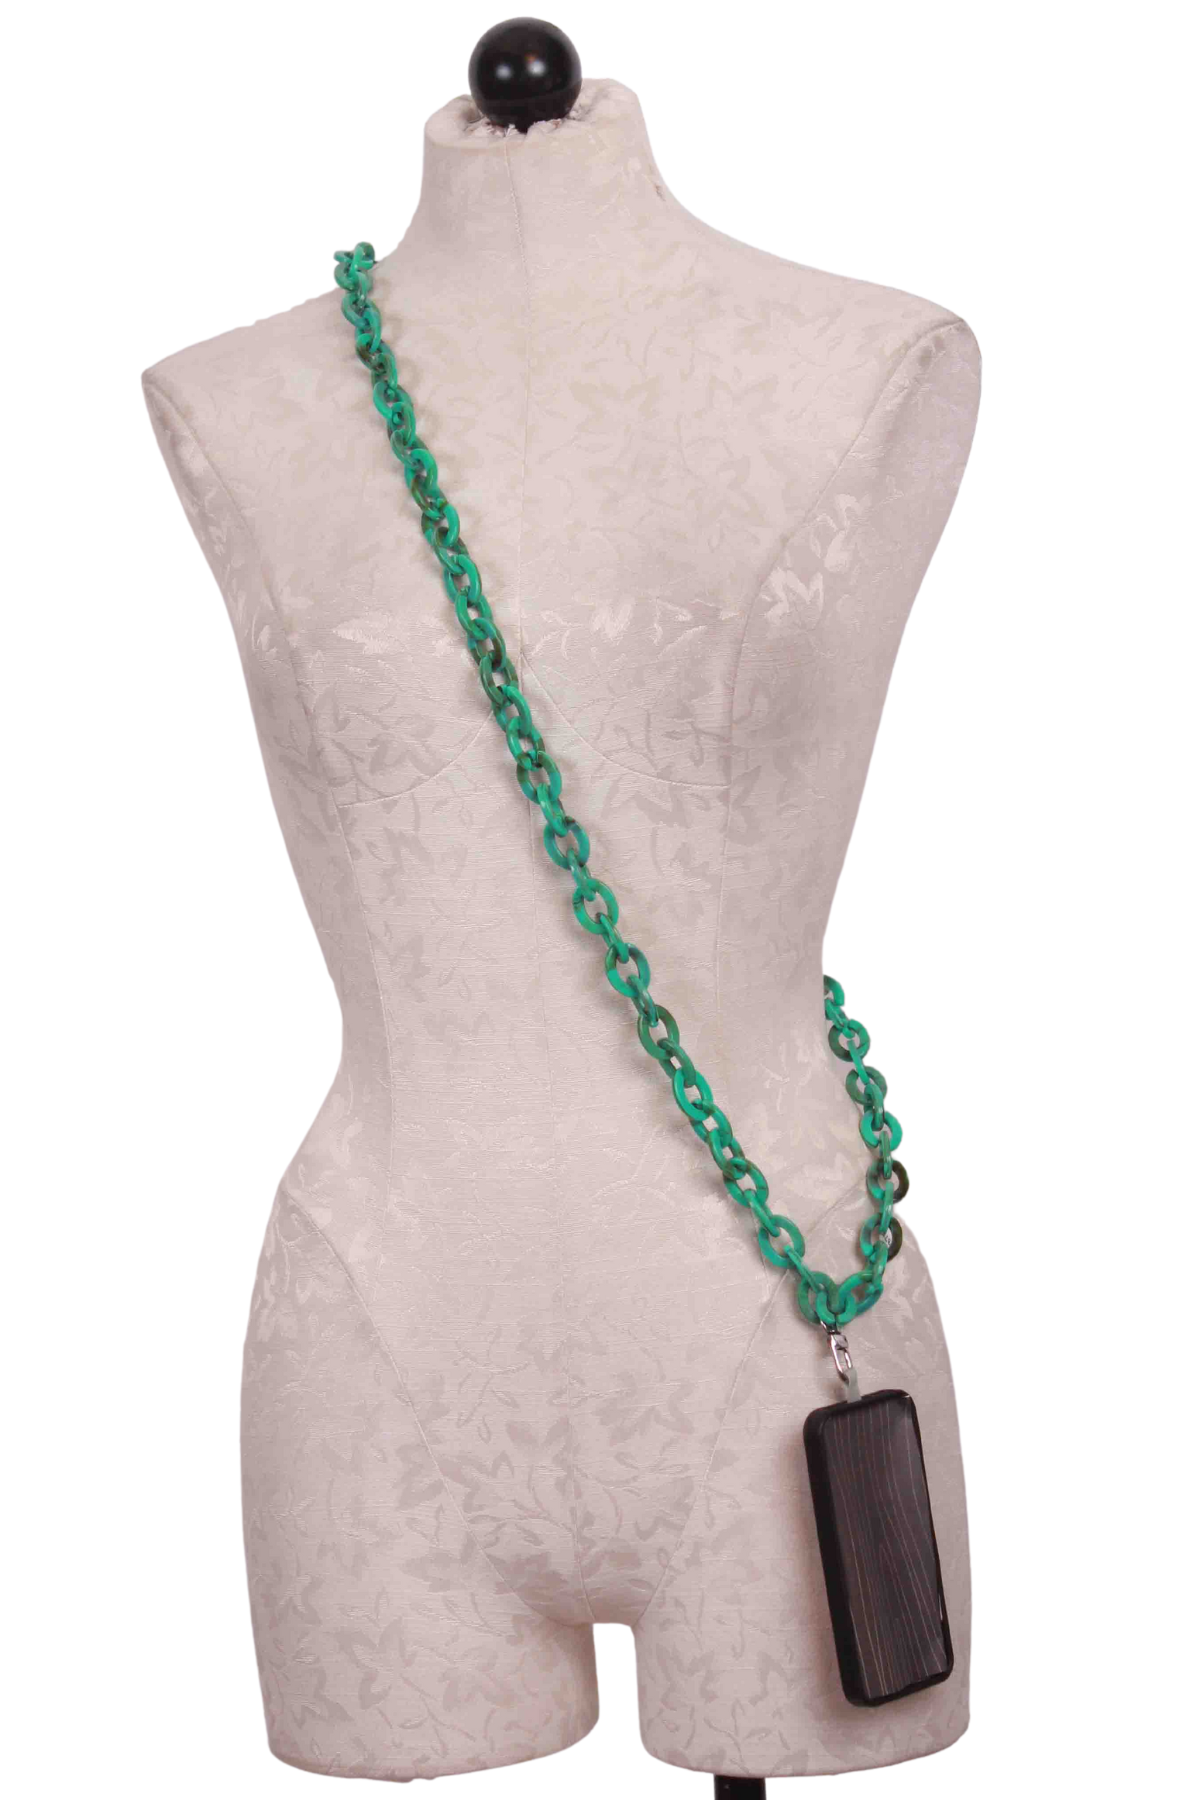 Tropical Turquoise Crossbody Phone Chain by Miami Chains